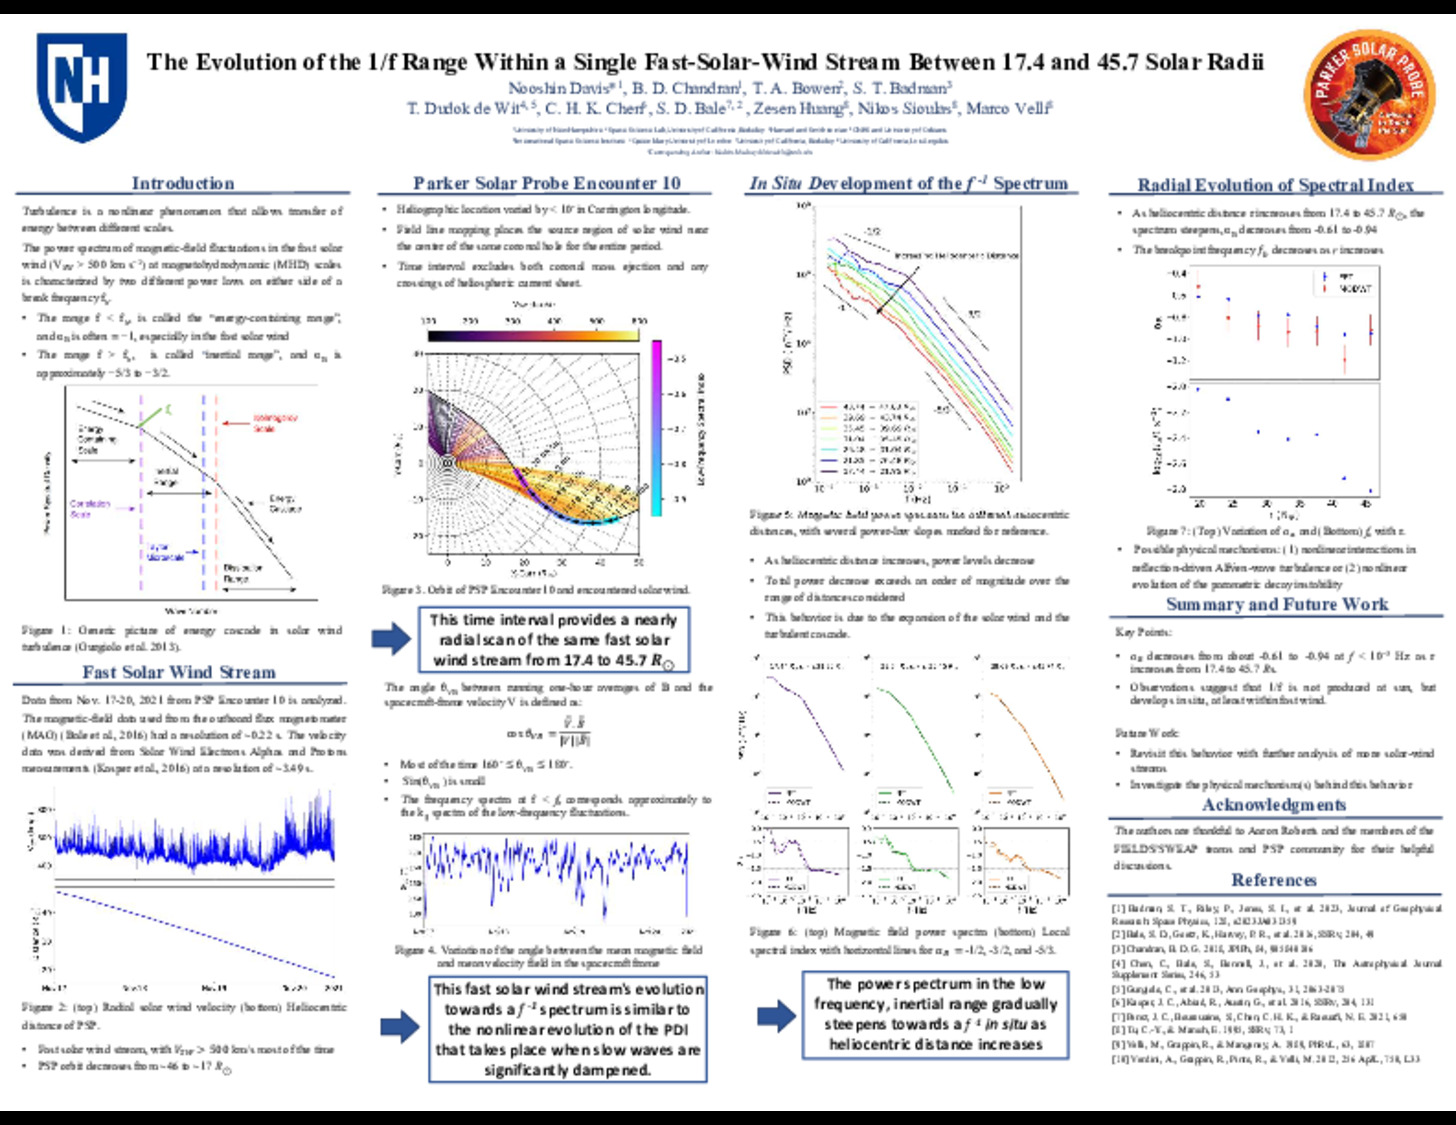 The Evolution Of The 1/F Range Within A Single Fast-Solar-Wind Stream Between 17.4 And 45.7 Solar Radii by Nooshin